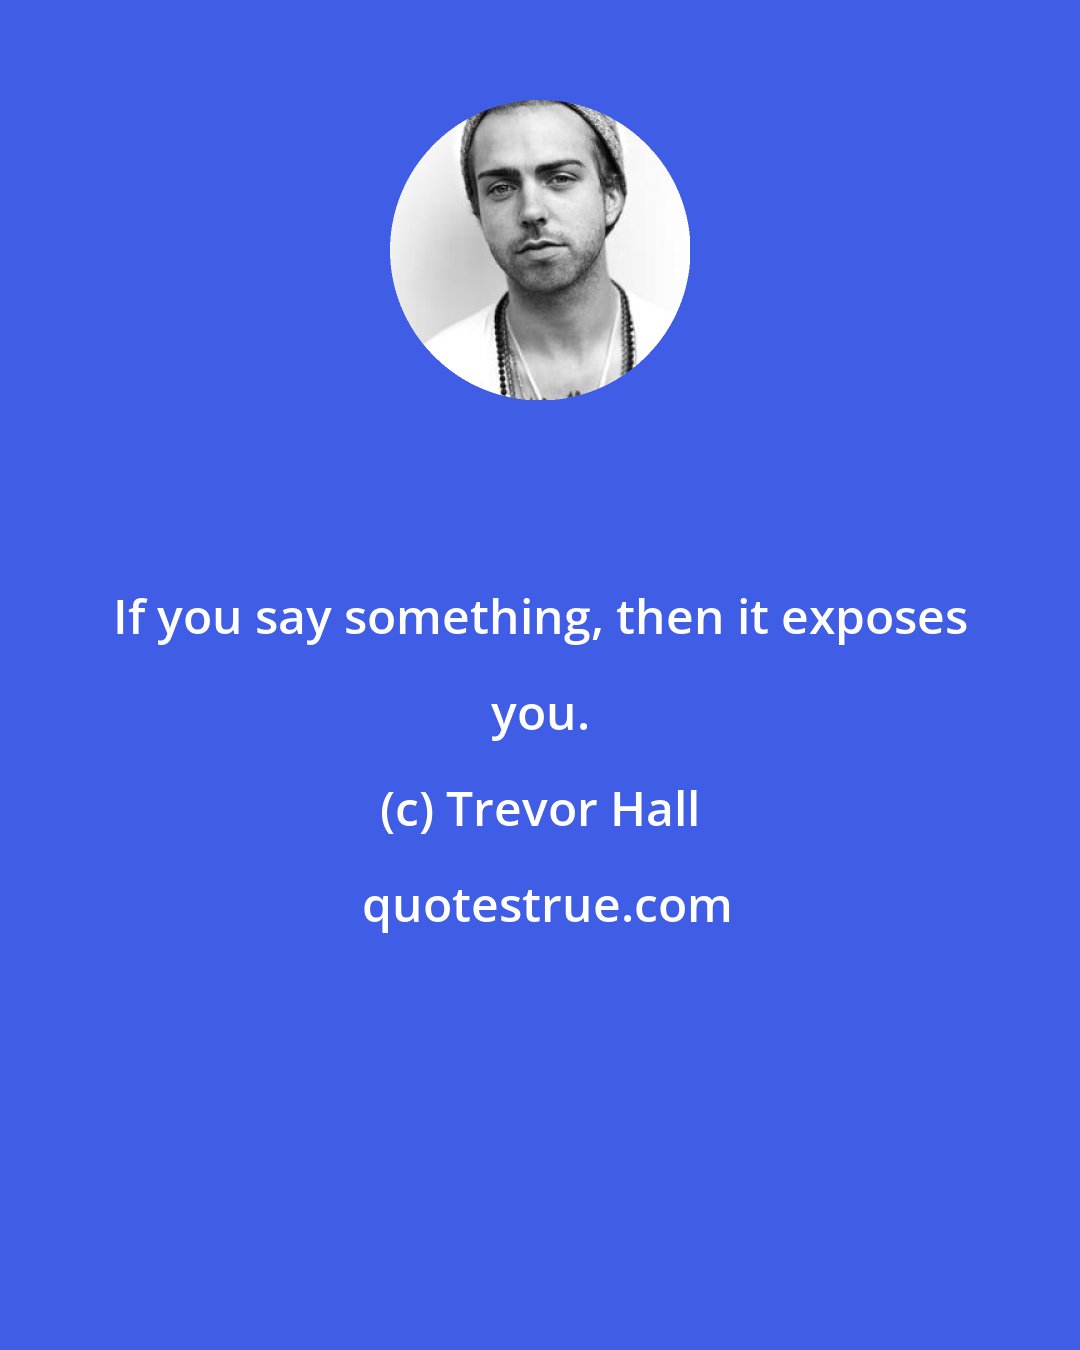 Trevor Hall: If you say something, then it exposes you.